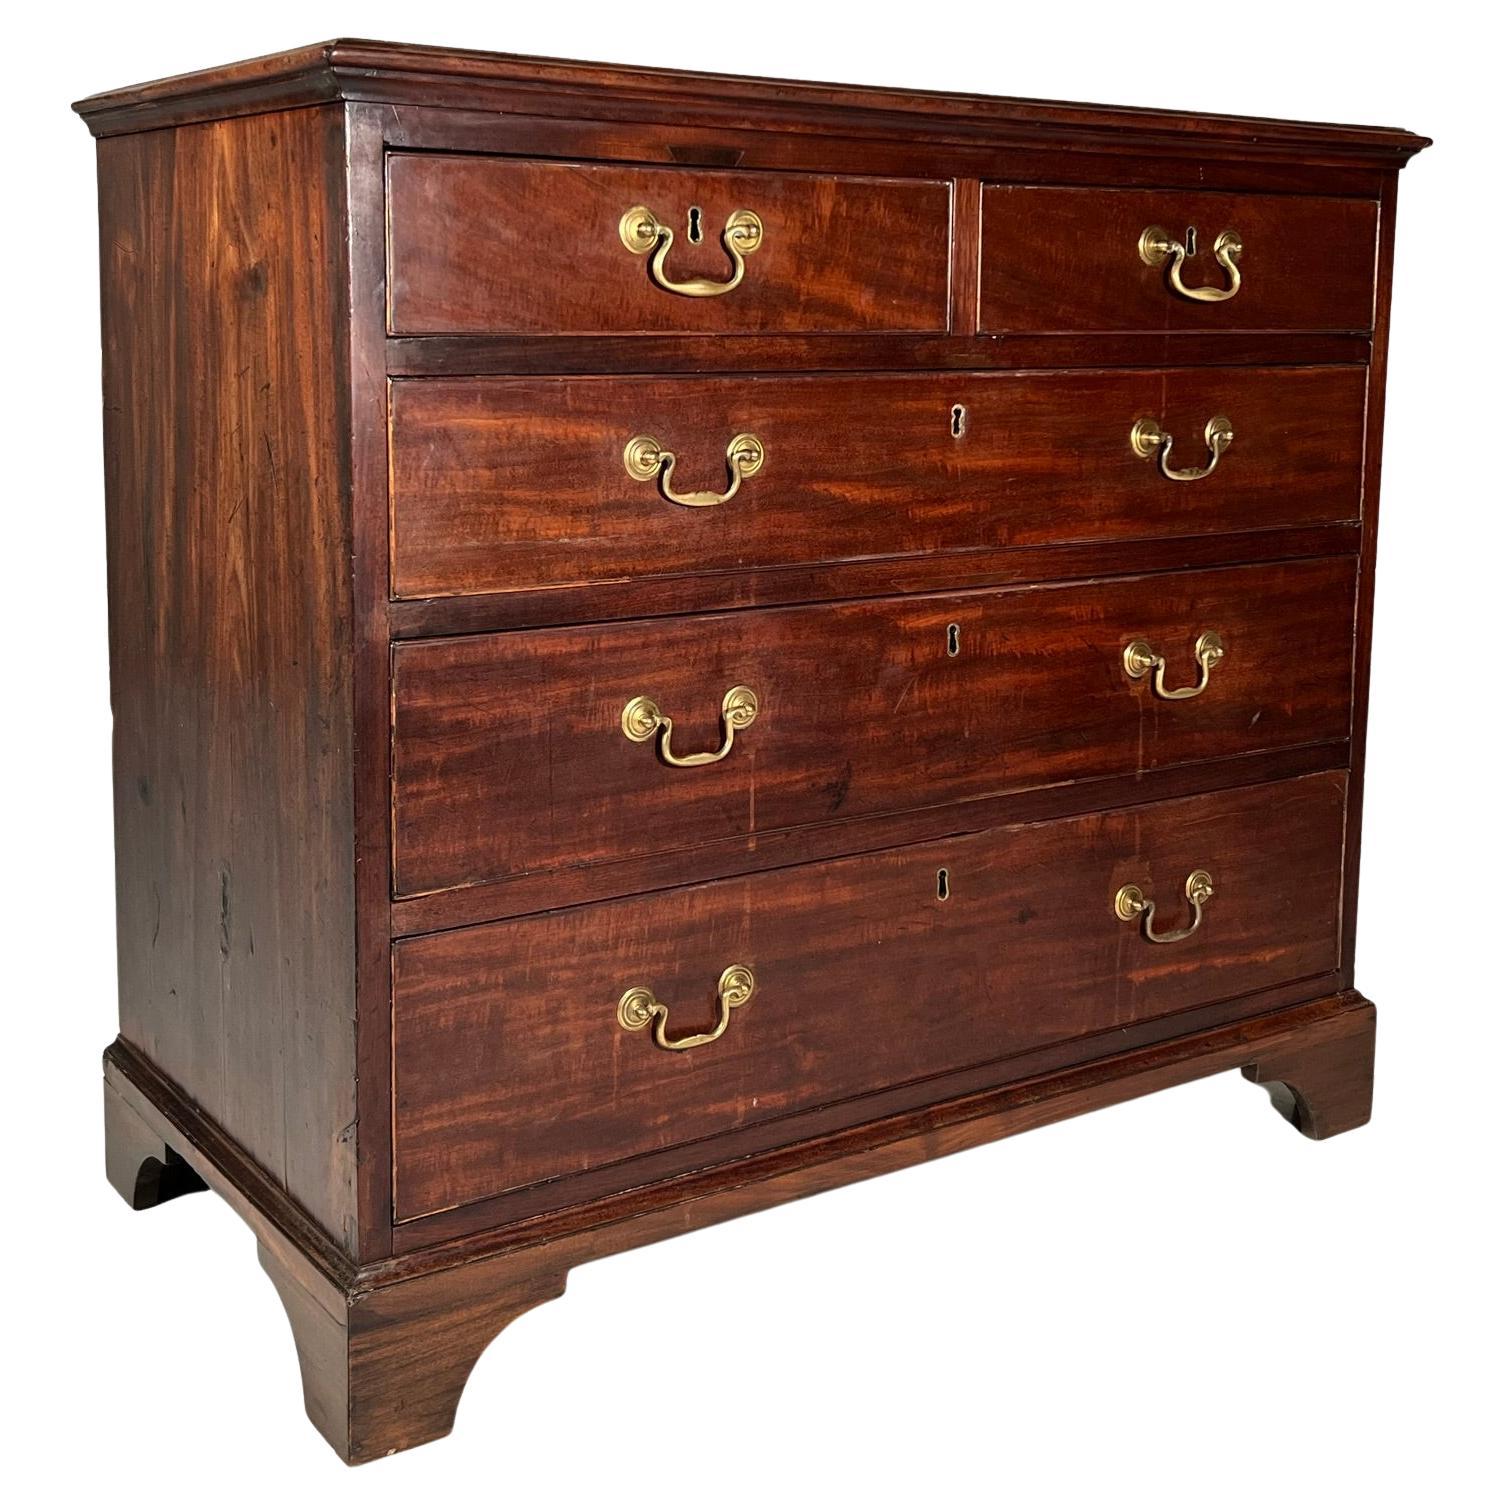 Late 19th Century Georgian Revival Chest of Drawers